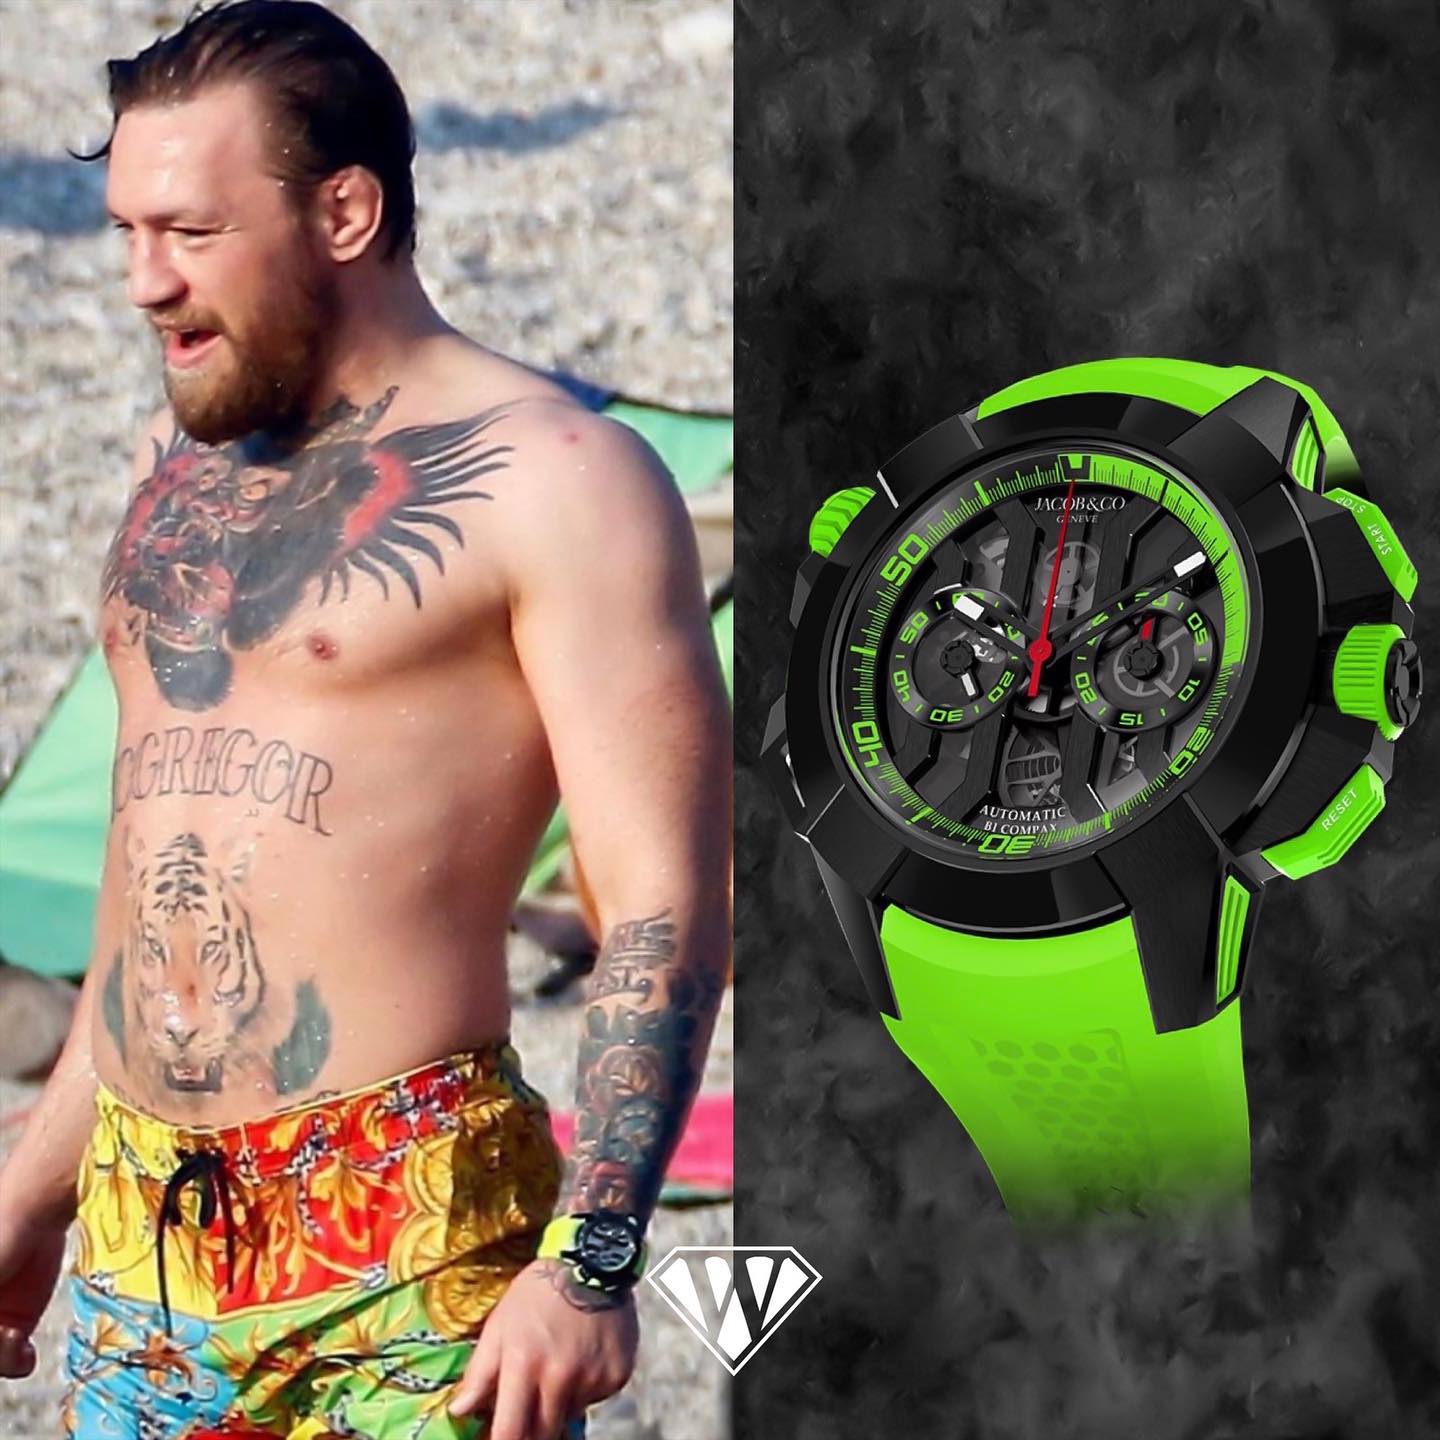 Conor McGregor Spotted Wearing an Extremely Rare $1 Million Iced Out Watch